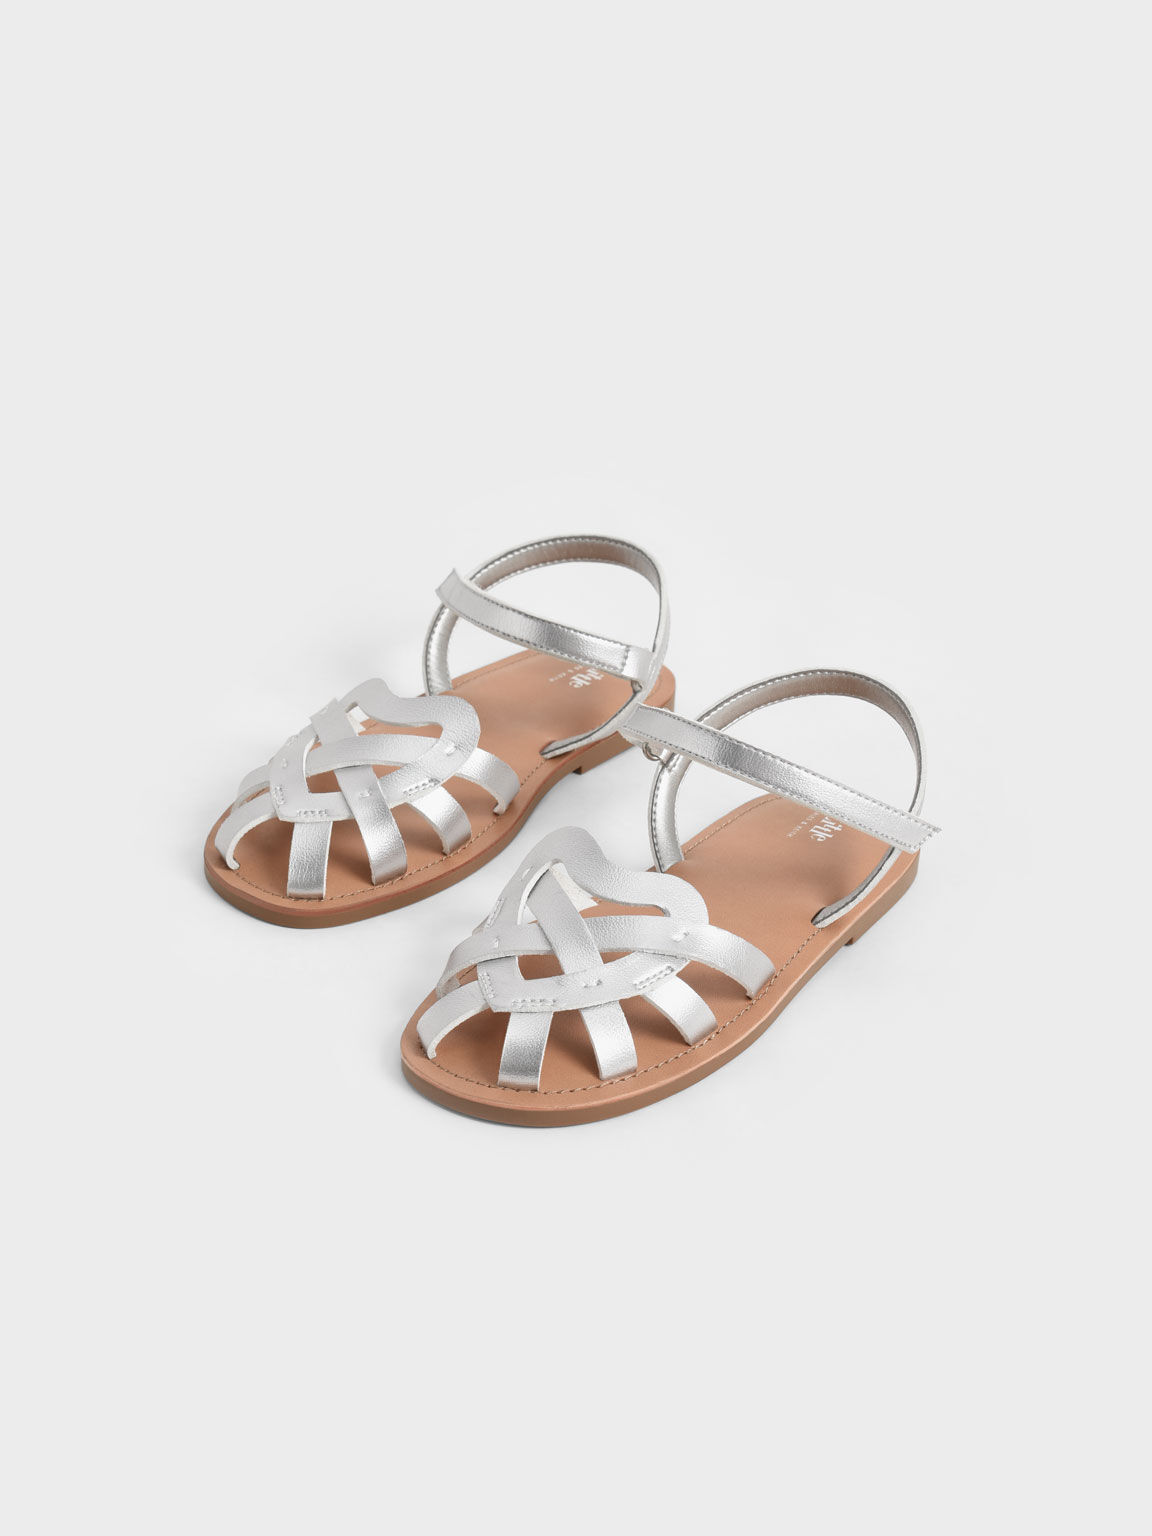 Girls' Caged Ankle-Strap Sandals - Silver